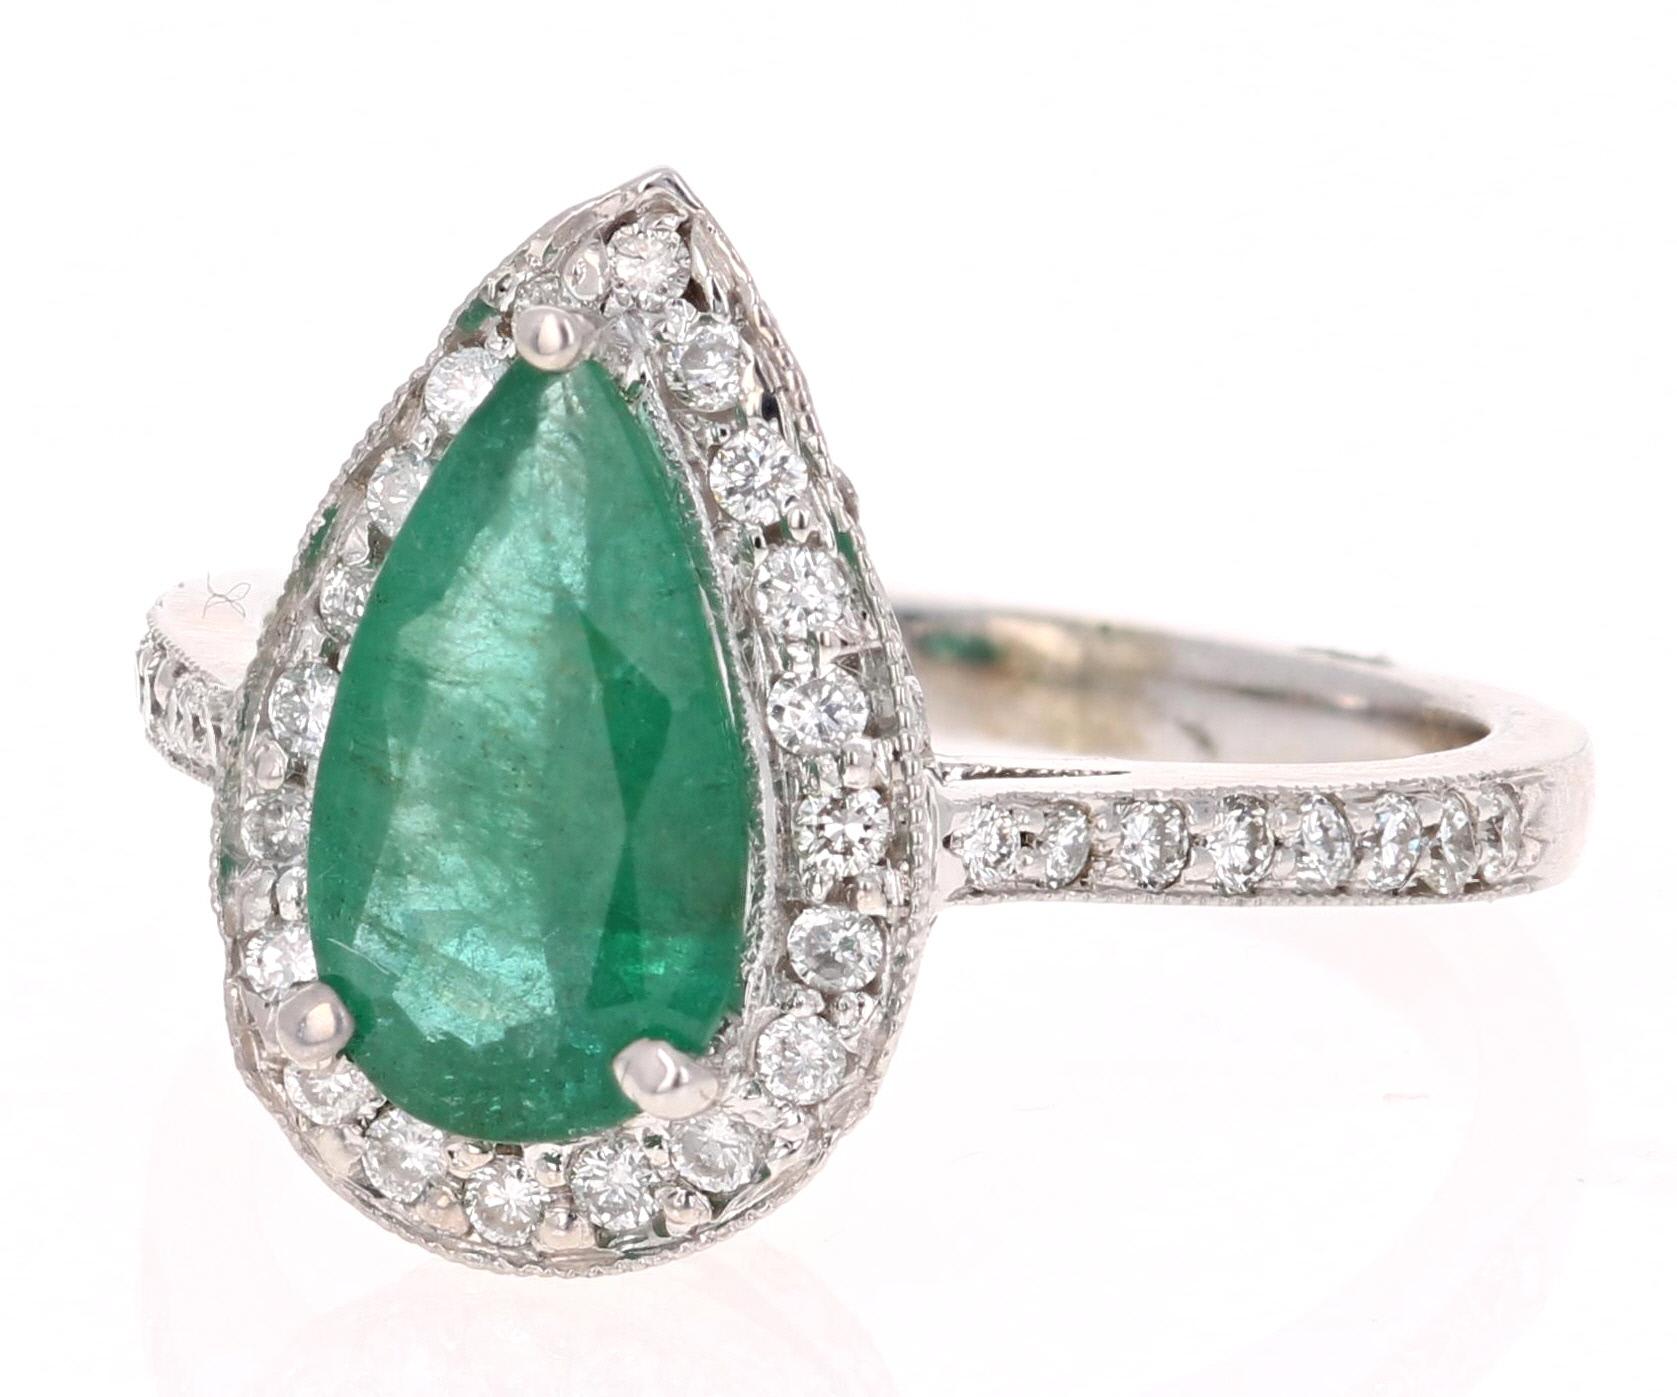 The Pear cut Emerald is 1.46 Carats and is surrounded by 75 Round Cut Diamonds at 0.61 Carats. The Clarity and Color of the Diamonds are VS2-H. 

It is set in 14K White Gold and is 4.8 grams. The ring is a size 7 and can be resized at no additional